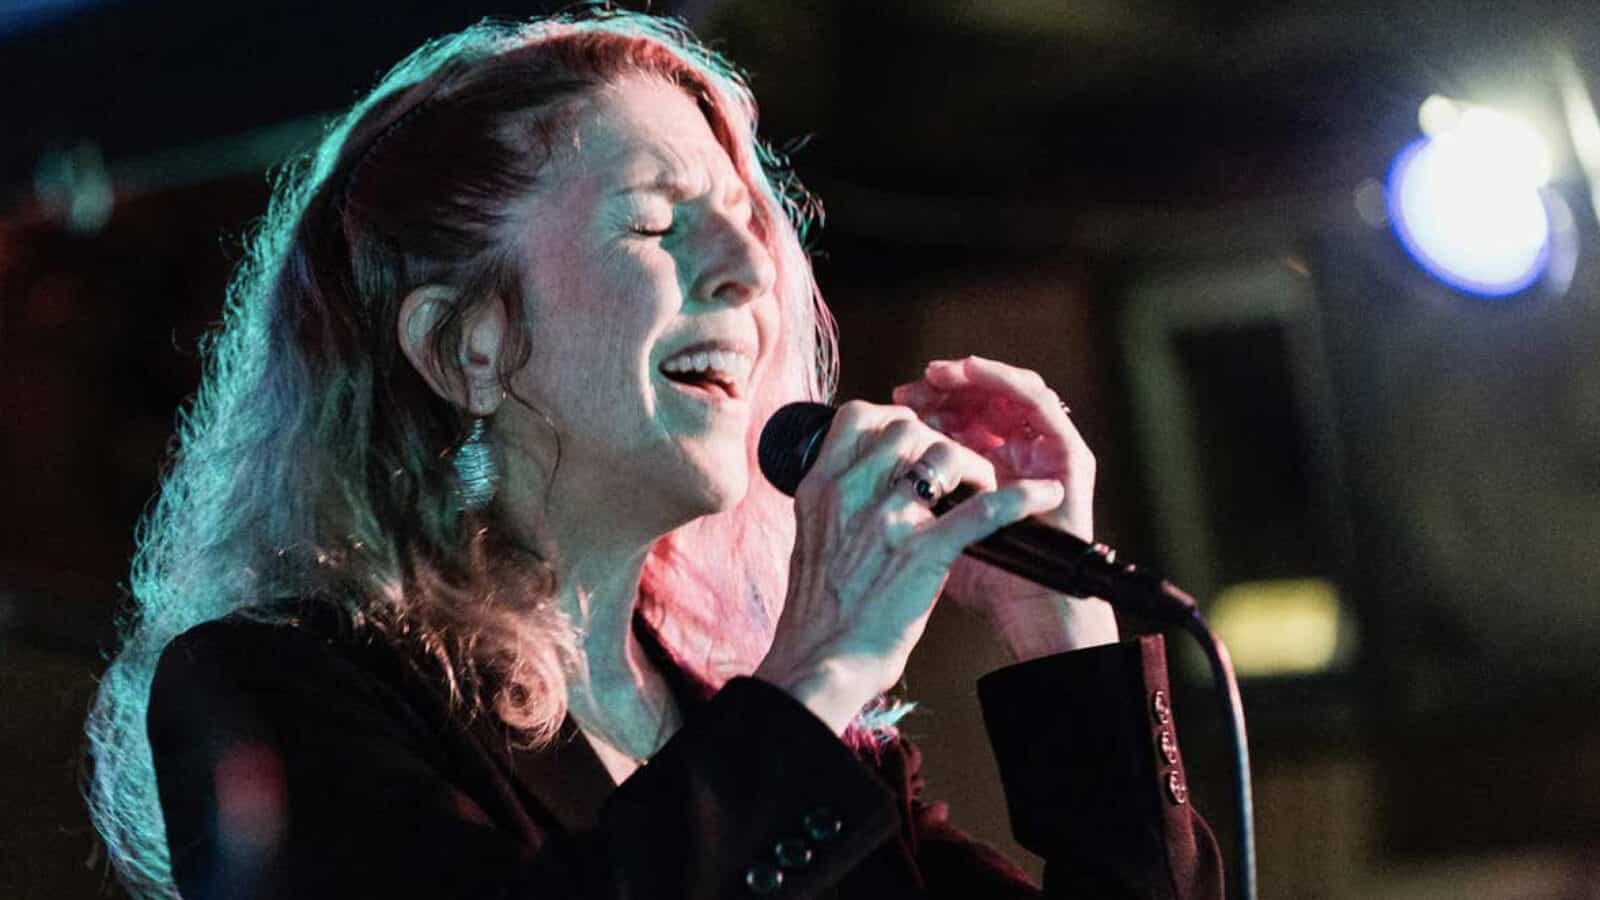 Jazz vocalist Suzi Stern performs in an outdoor concert at night. Press photo courtesy of the artist